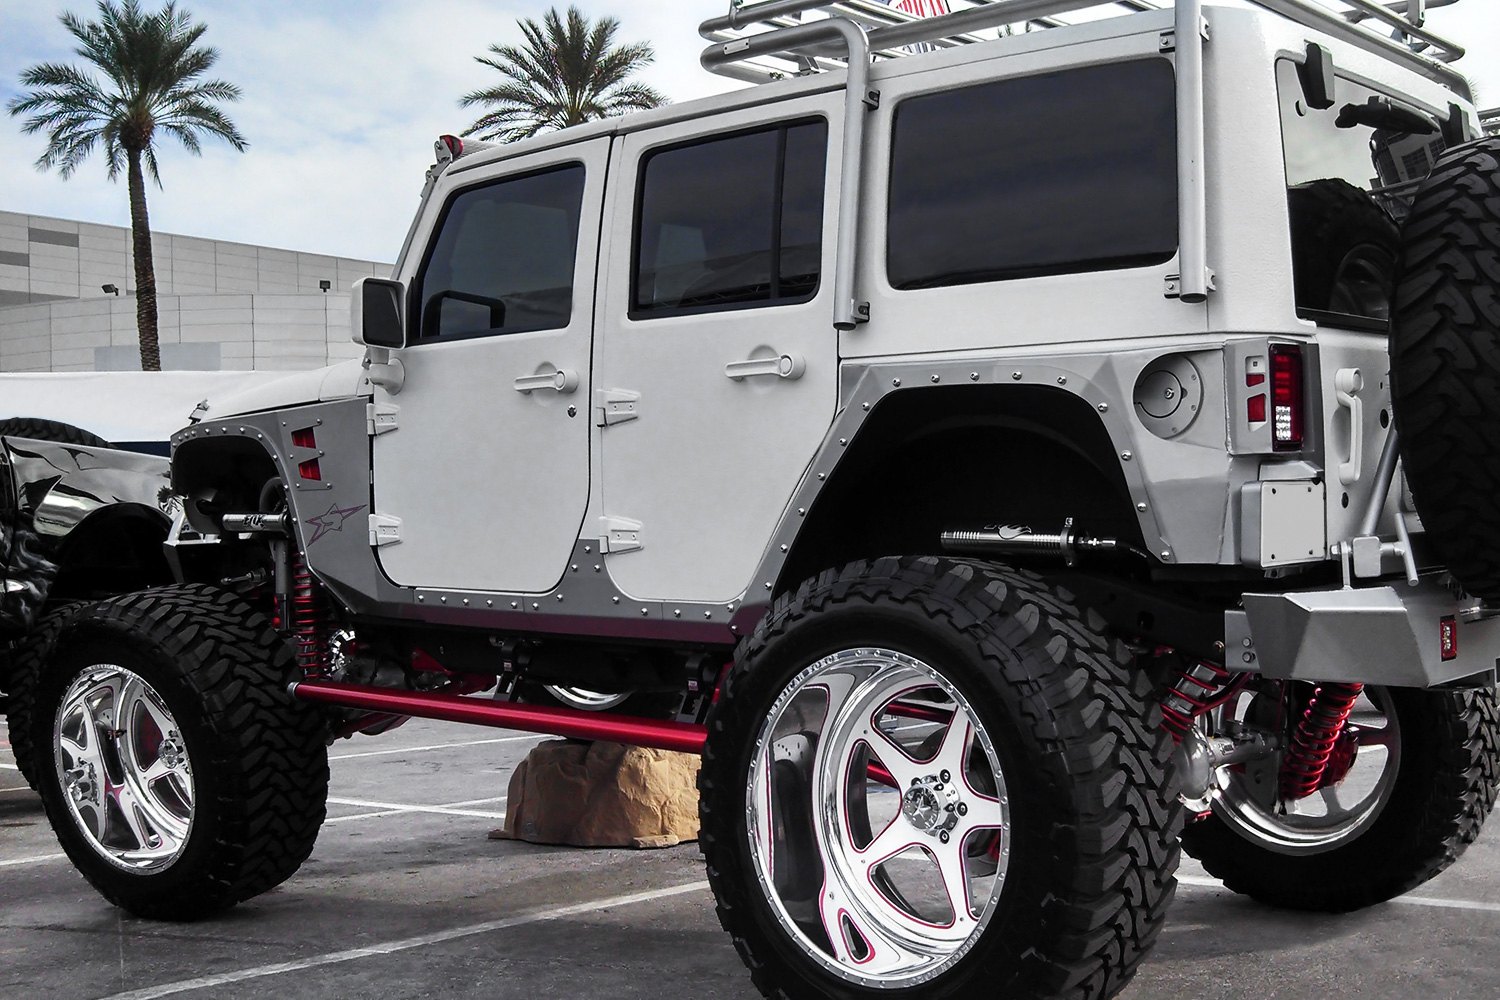 AMERICAN FORCE ® - INDEPENDENCE Polished on Jeep Wrangler.